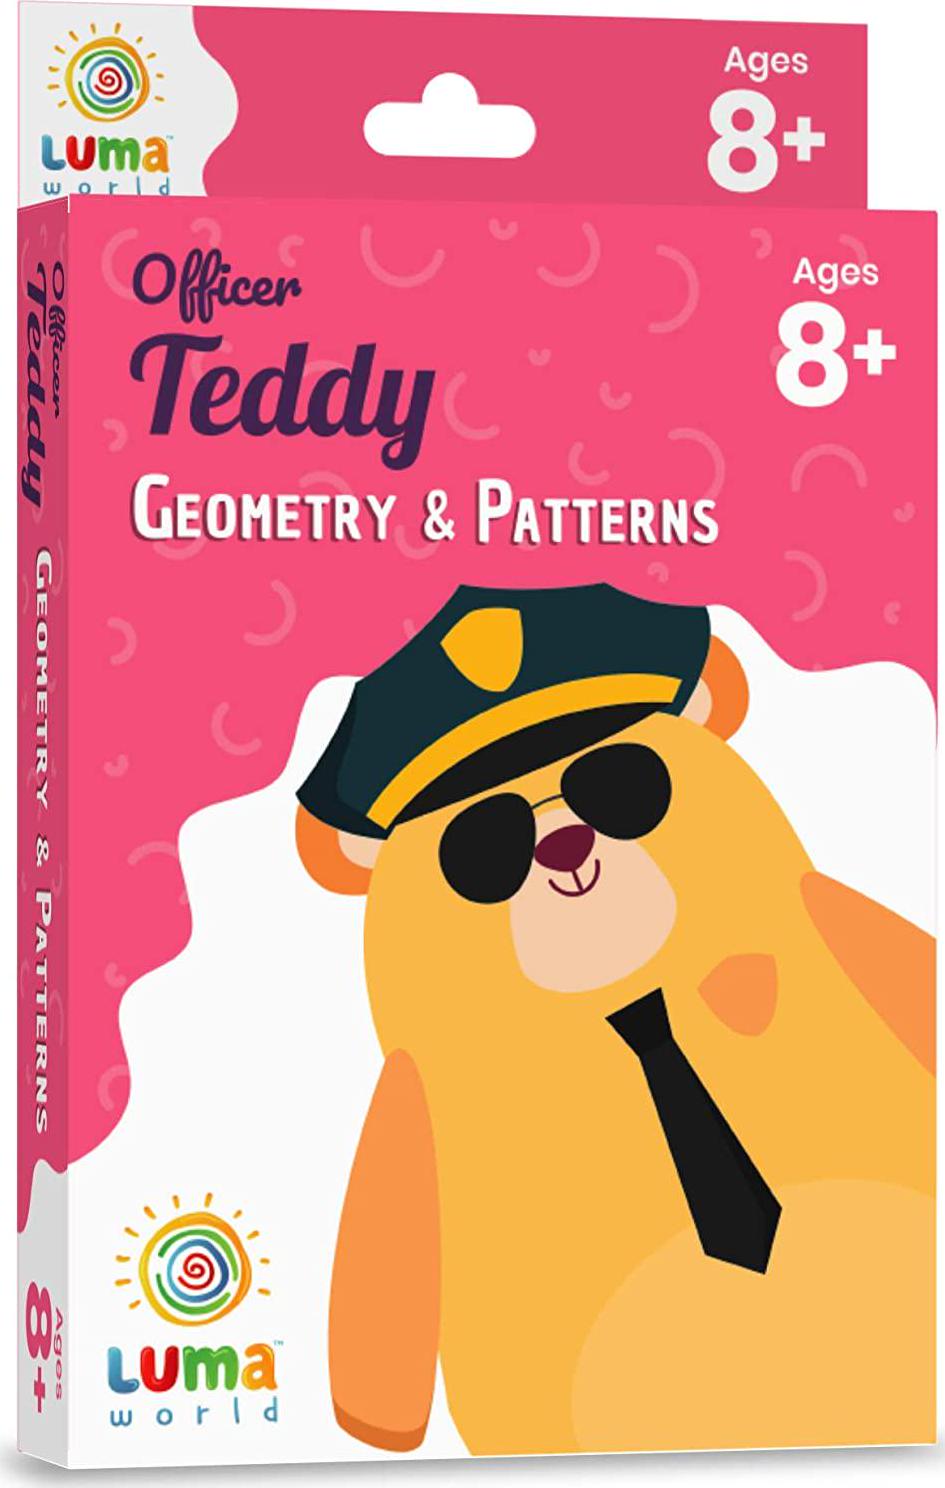 LUMA WORLD ADD LIFE TO LEARNING, Luma World Educational Flash Cards for Ages 8 and Up: Officer Teddy | Game-Based Maths Flash Cards with Magic Glass to View Hidden Answers | Learn Grade 3 Geometry and Patterns (Set of 50 Cards)